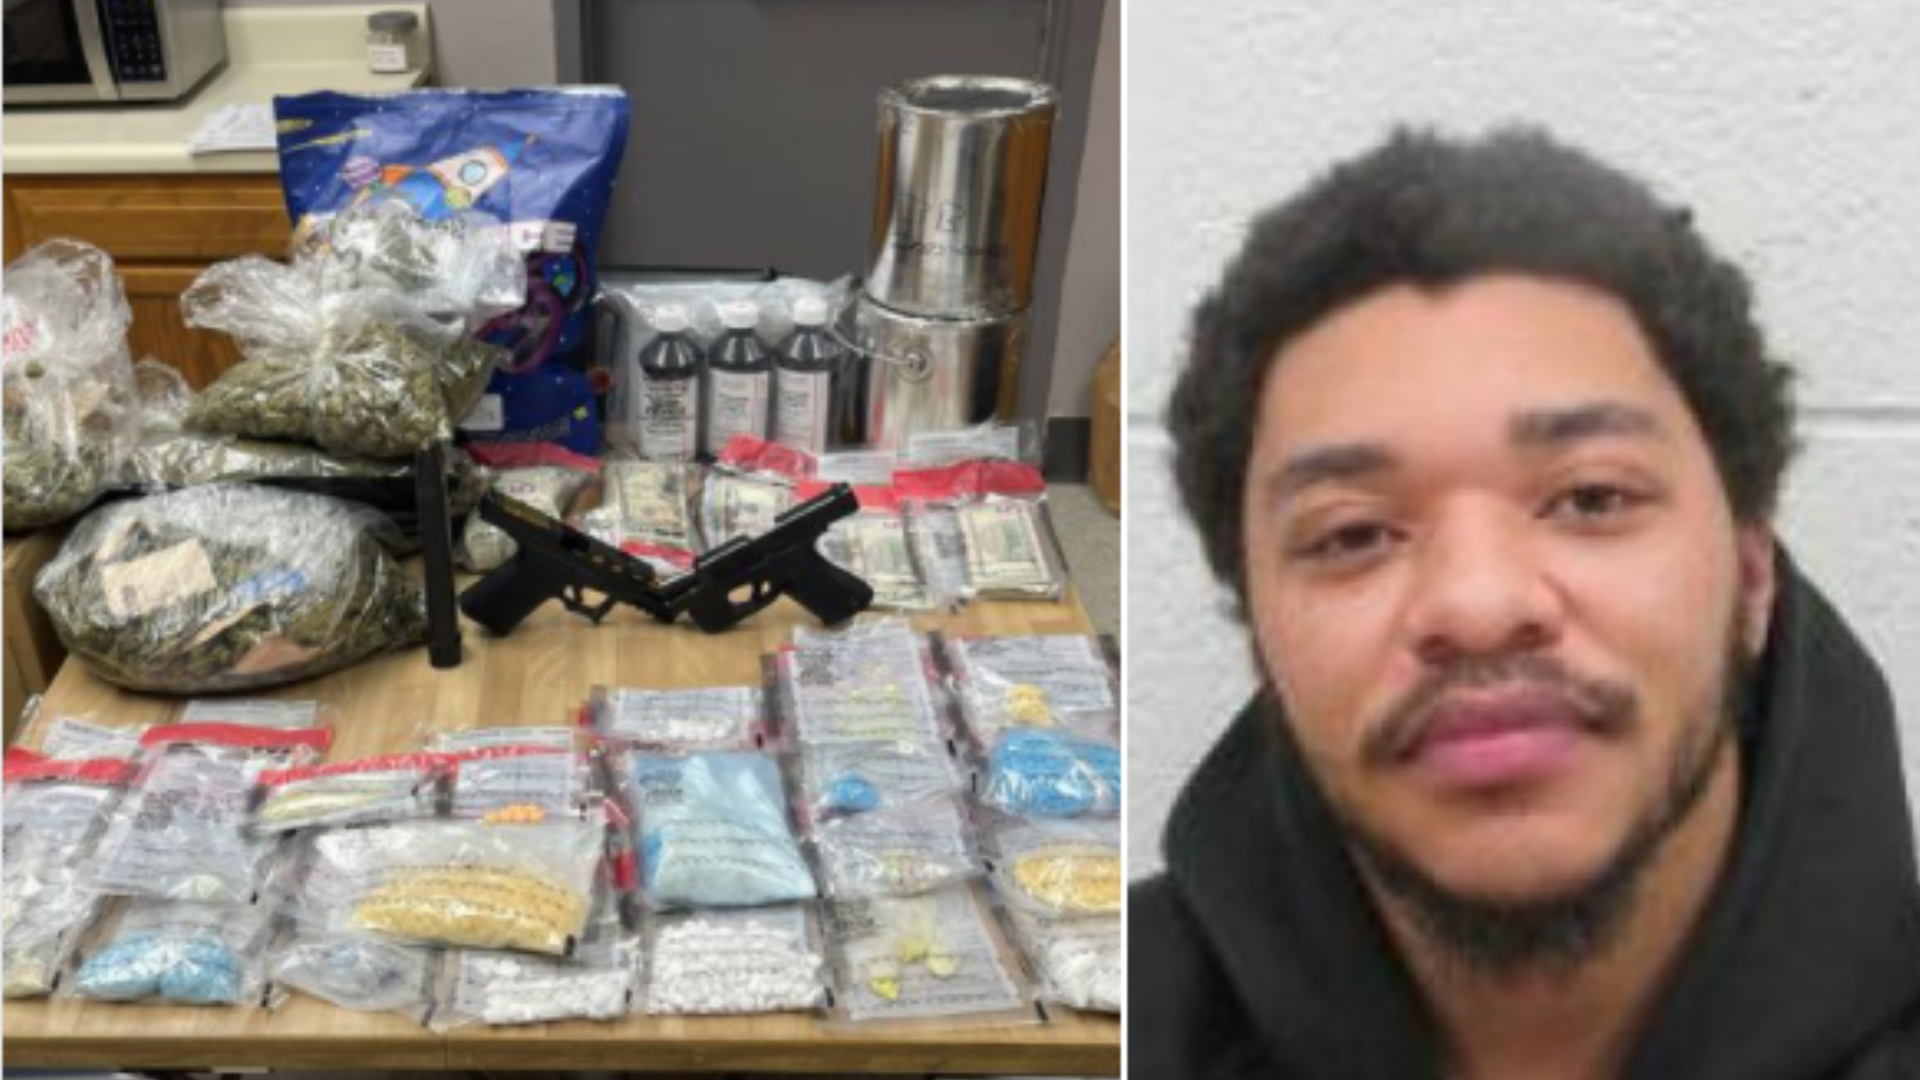 More than 14 pounds of drugs found in largest drug bust in Rutherford Co.  history, deputies say